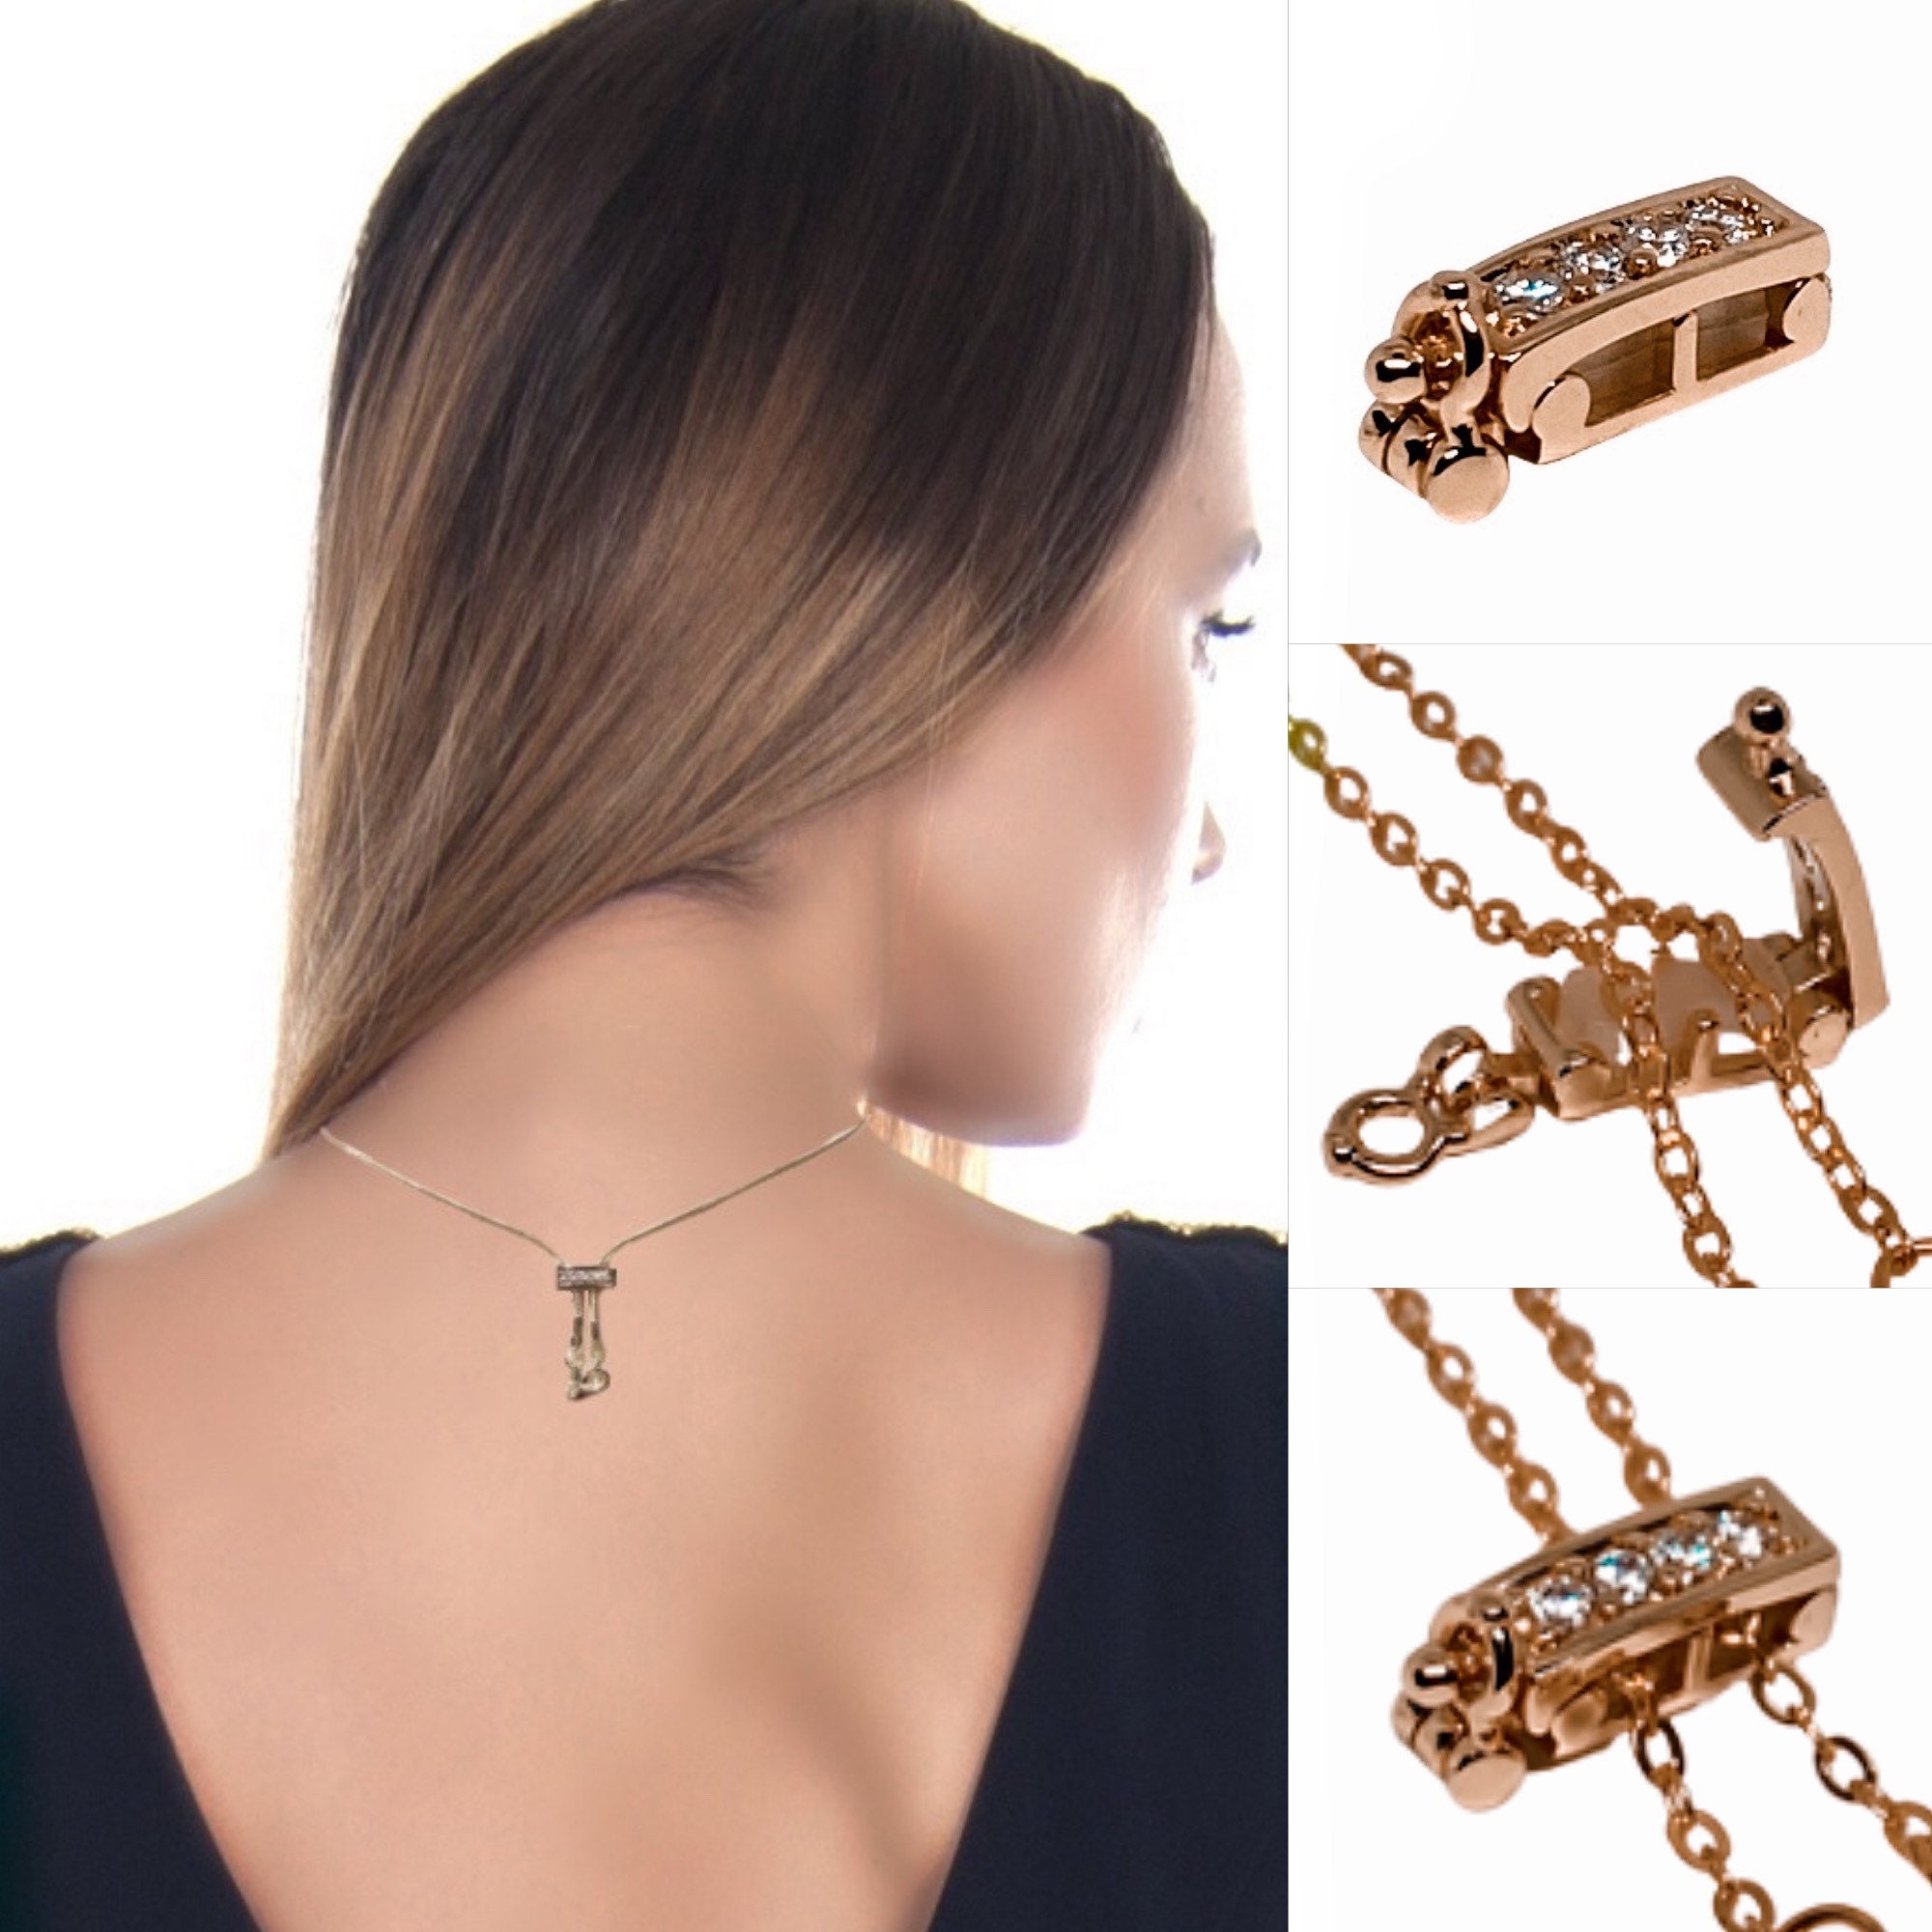 two easy ways to shorten a necklace chain yourself!